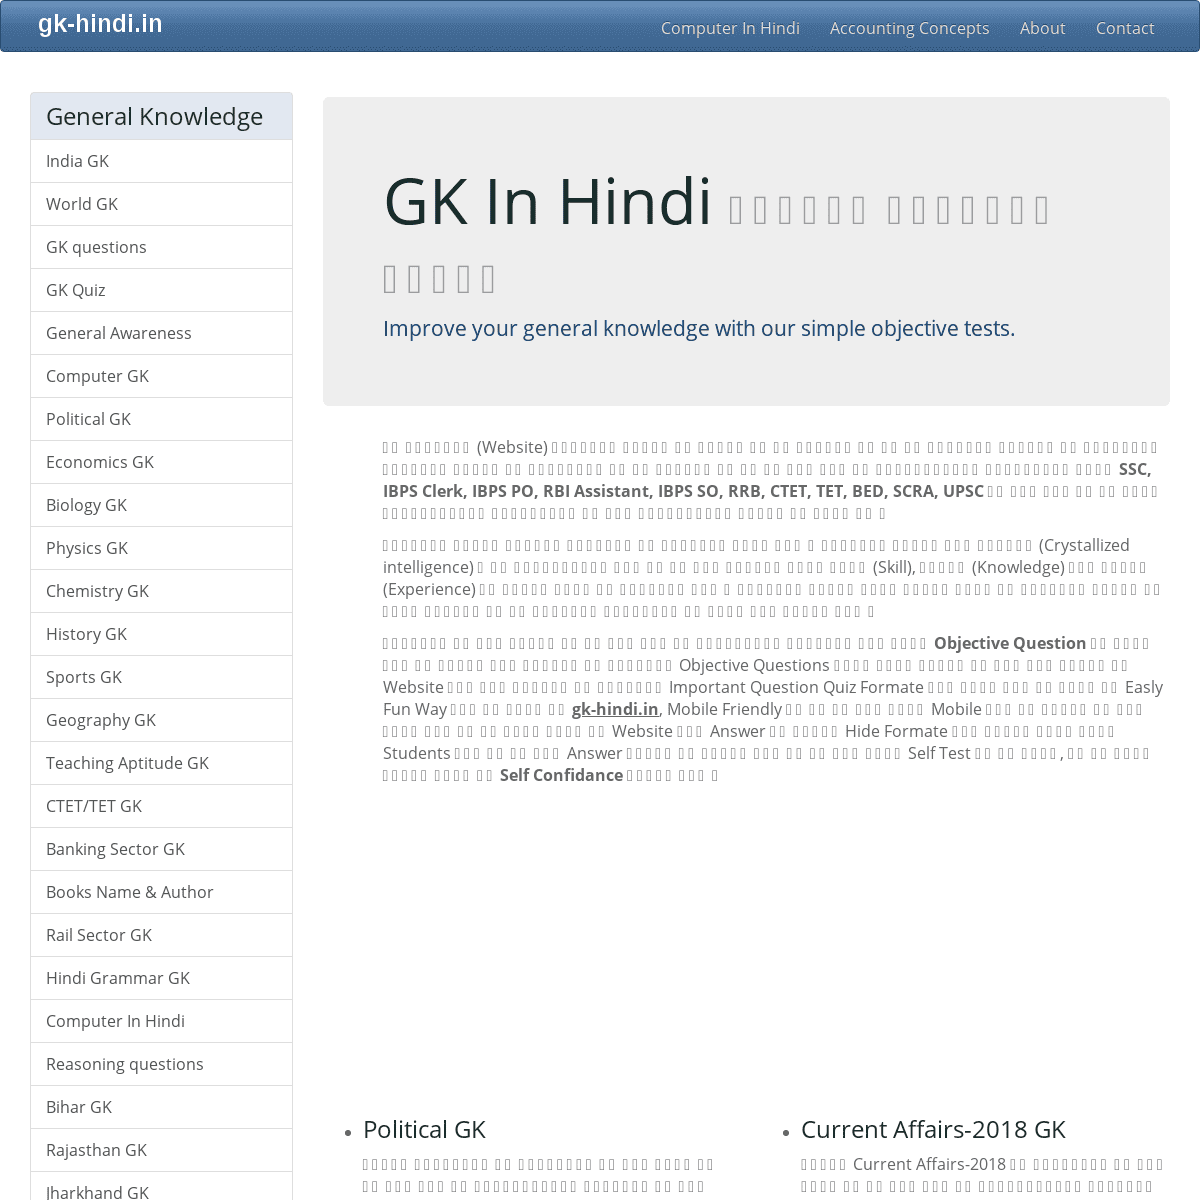 GK in Hindi - General Knowledge Questions in Hindi